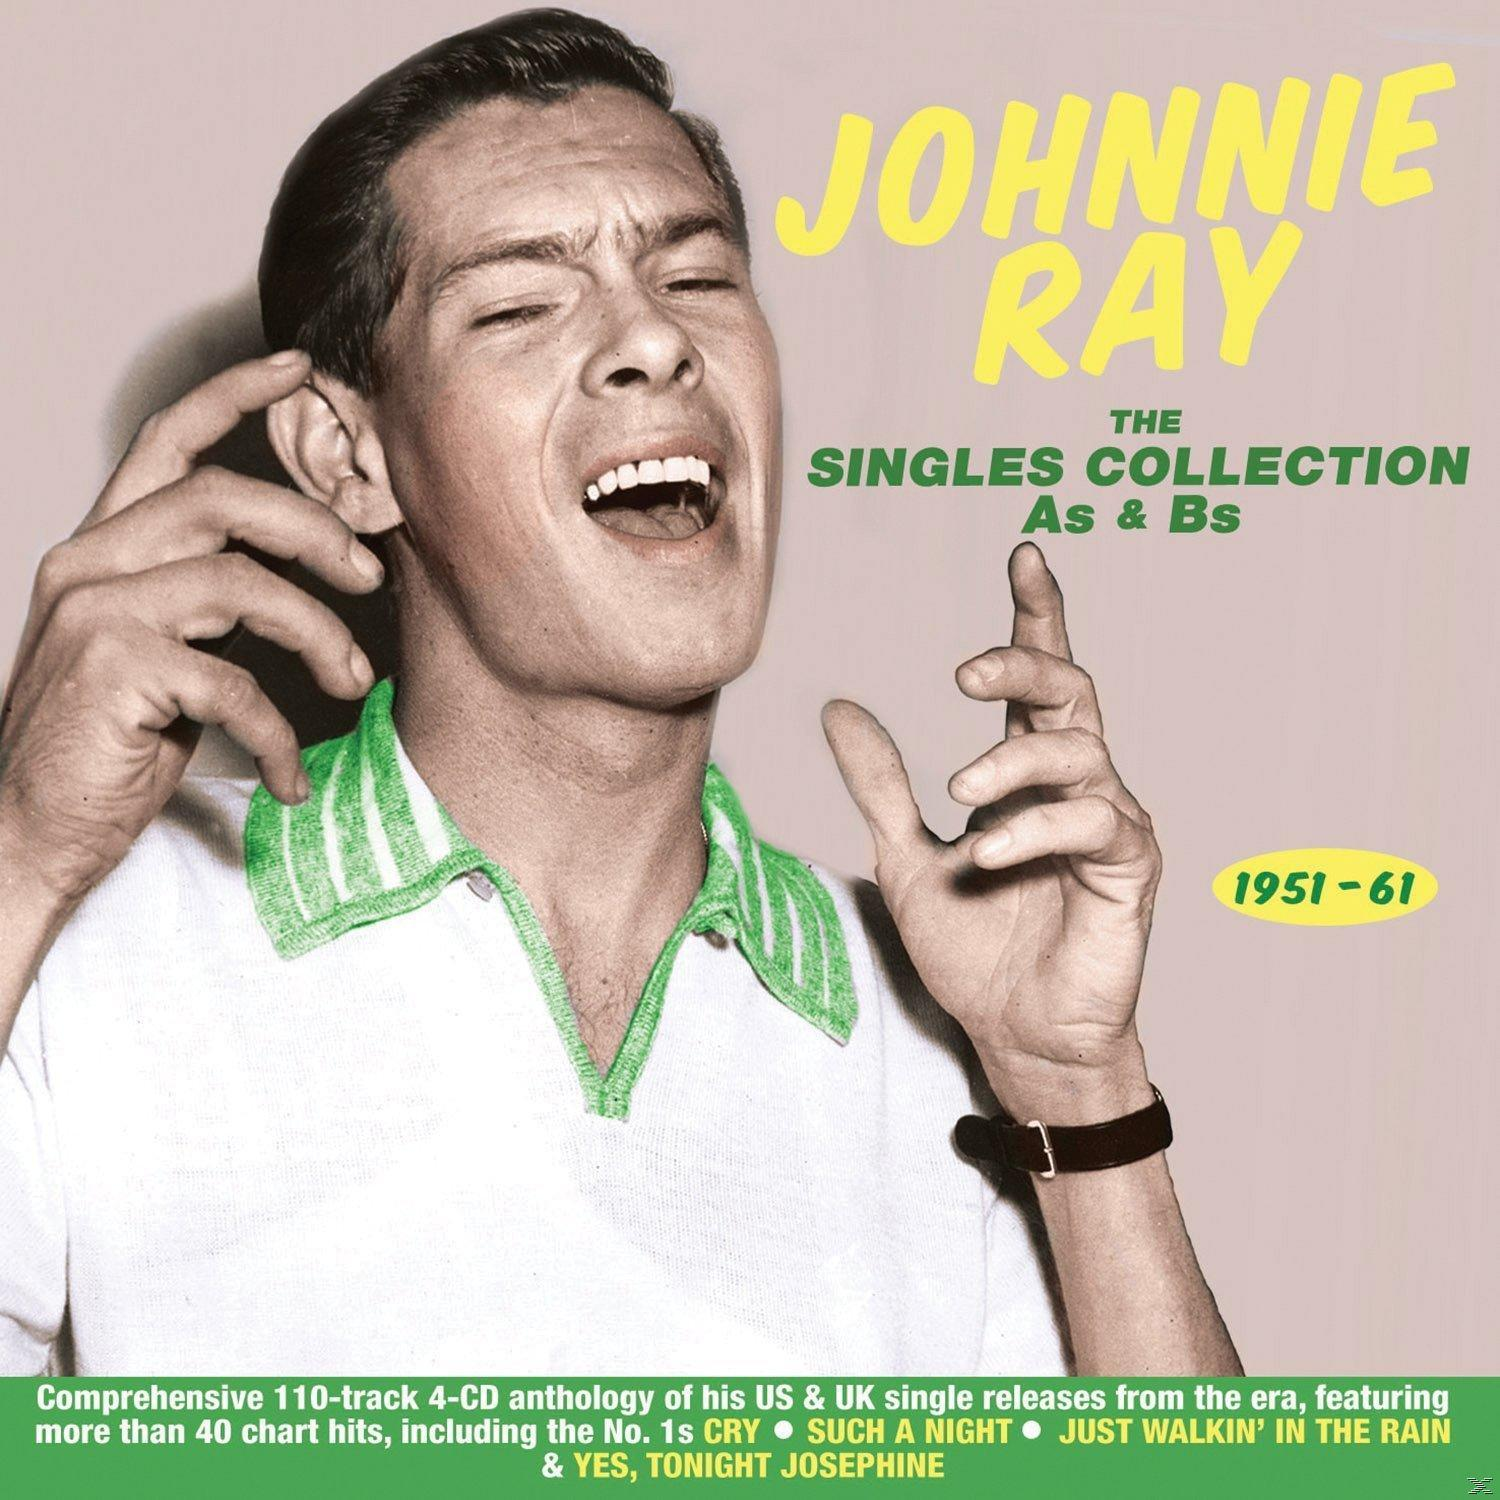 Johnnie Ray - & The Bs Collection As 1951-61 Singles - (CD)